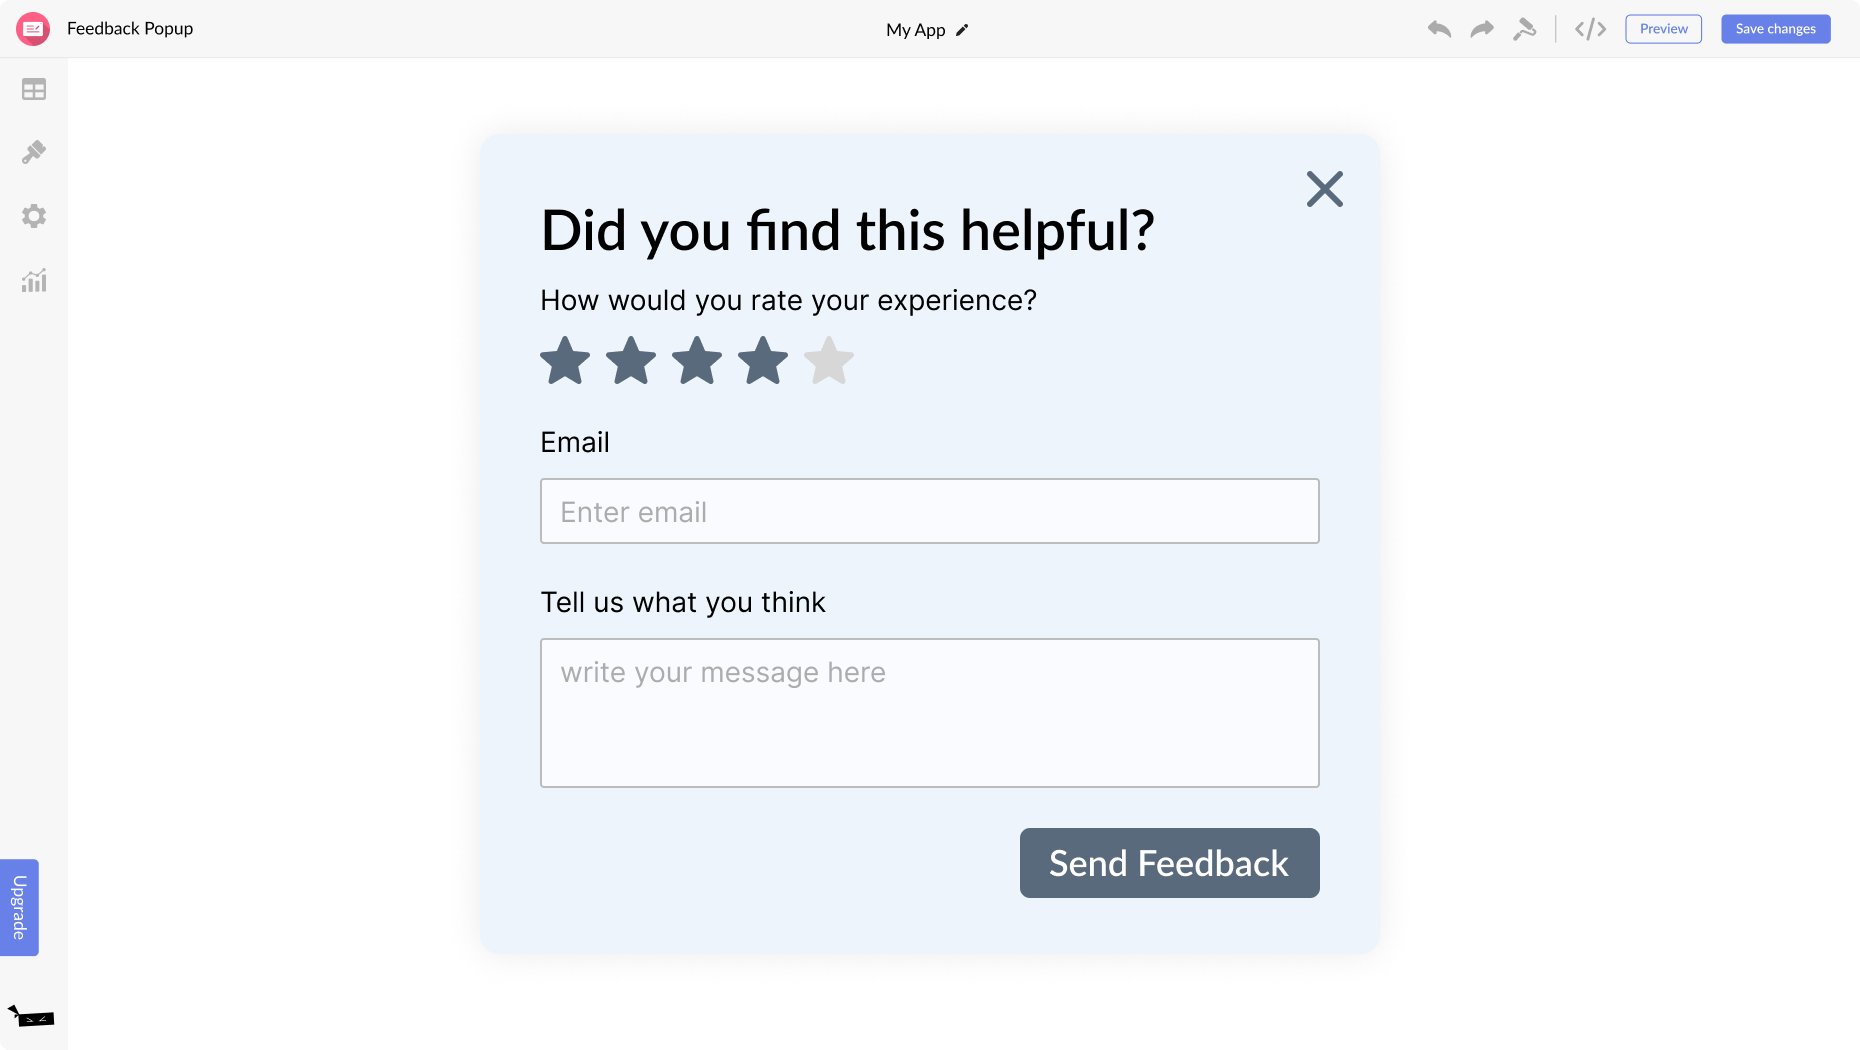 Feedback Popup for Goope